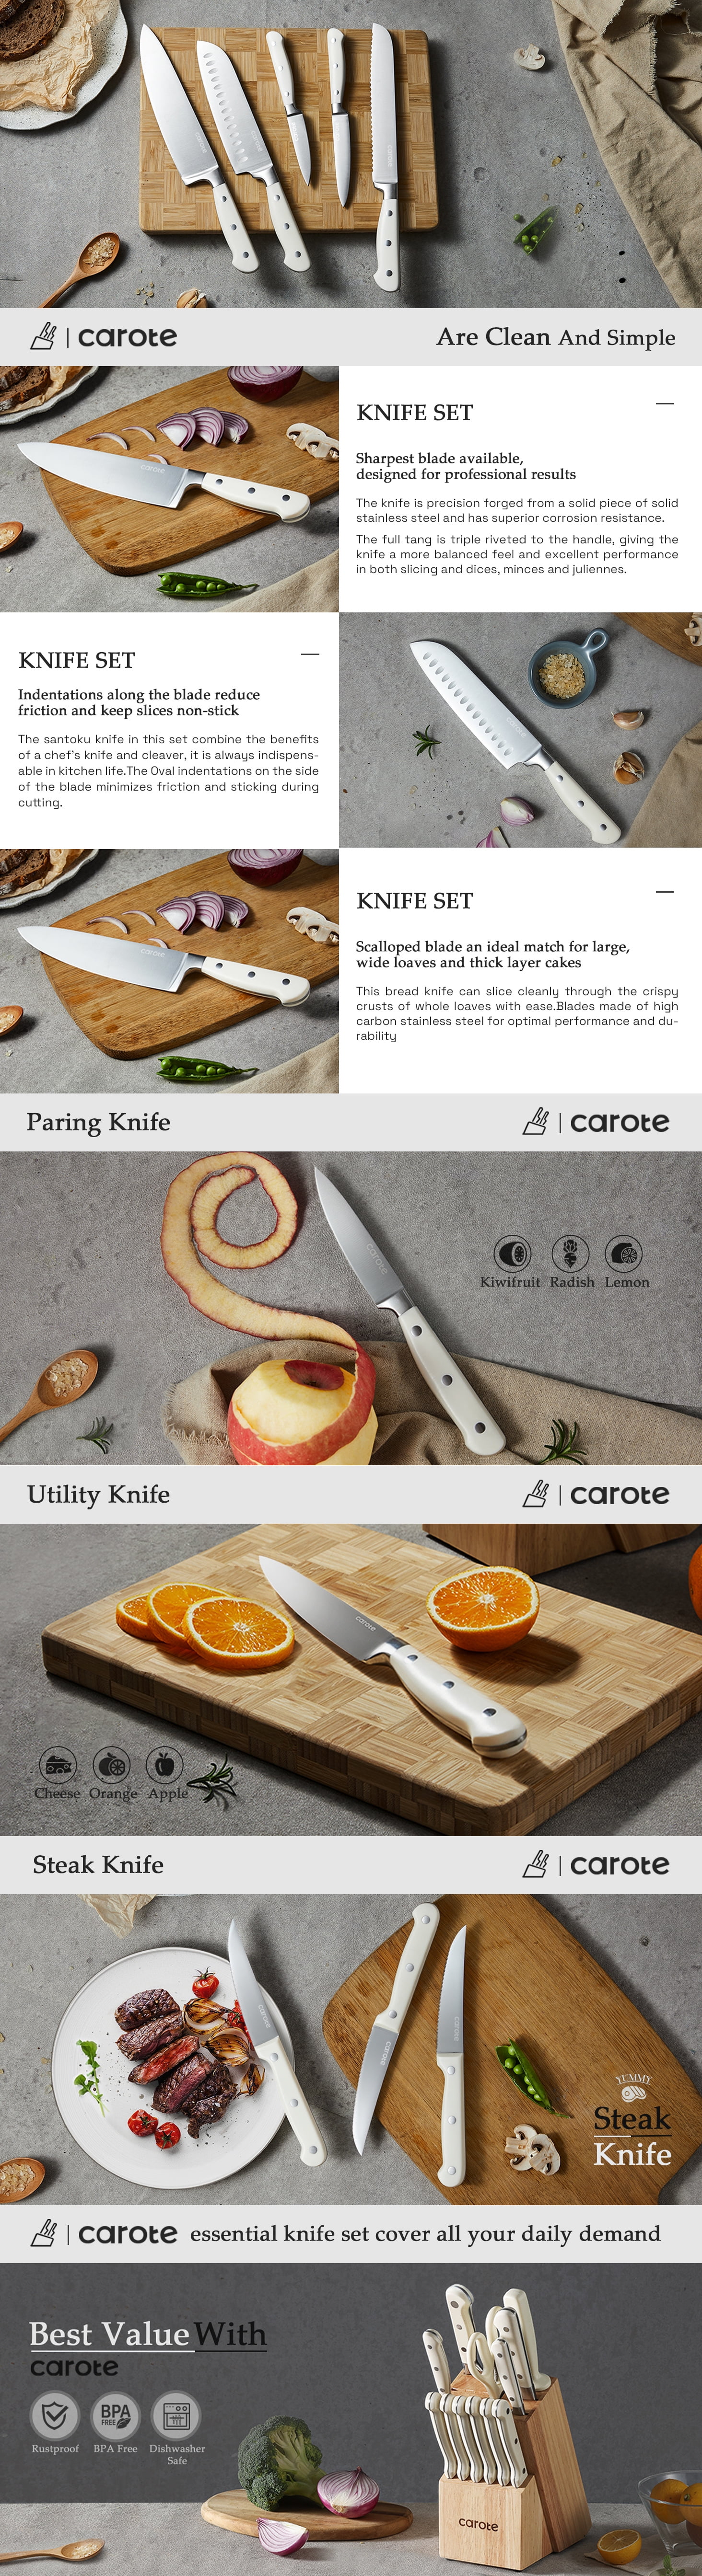 Carote Stainless Steel Chef's Knife, Carote Kitchen Knife Review